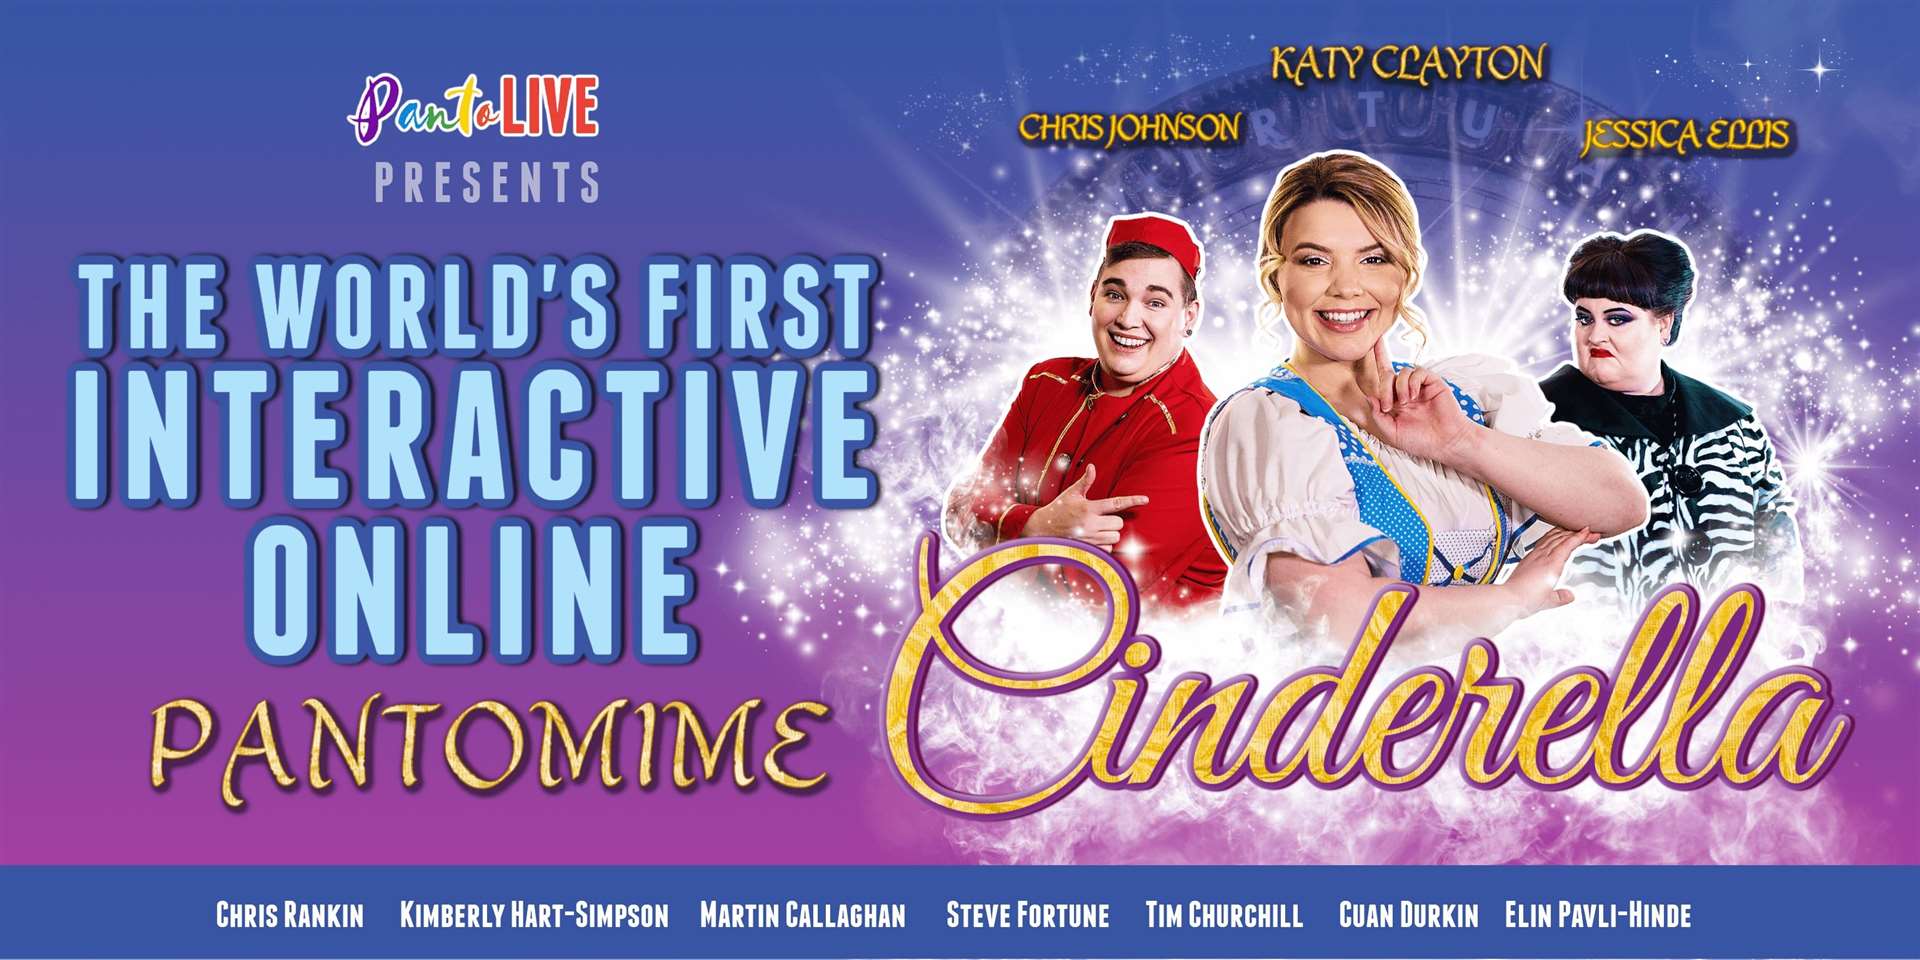 There's still time to catch up with all the fun of the panto.